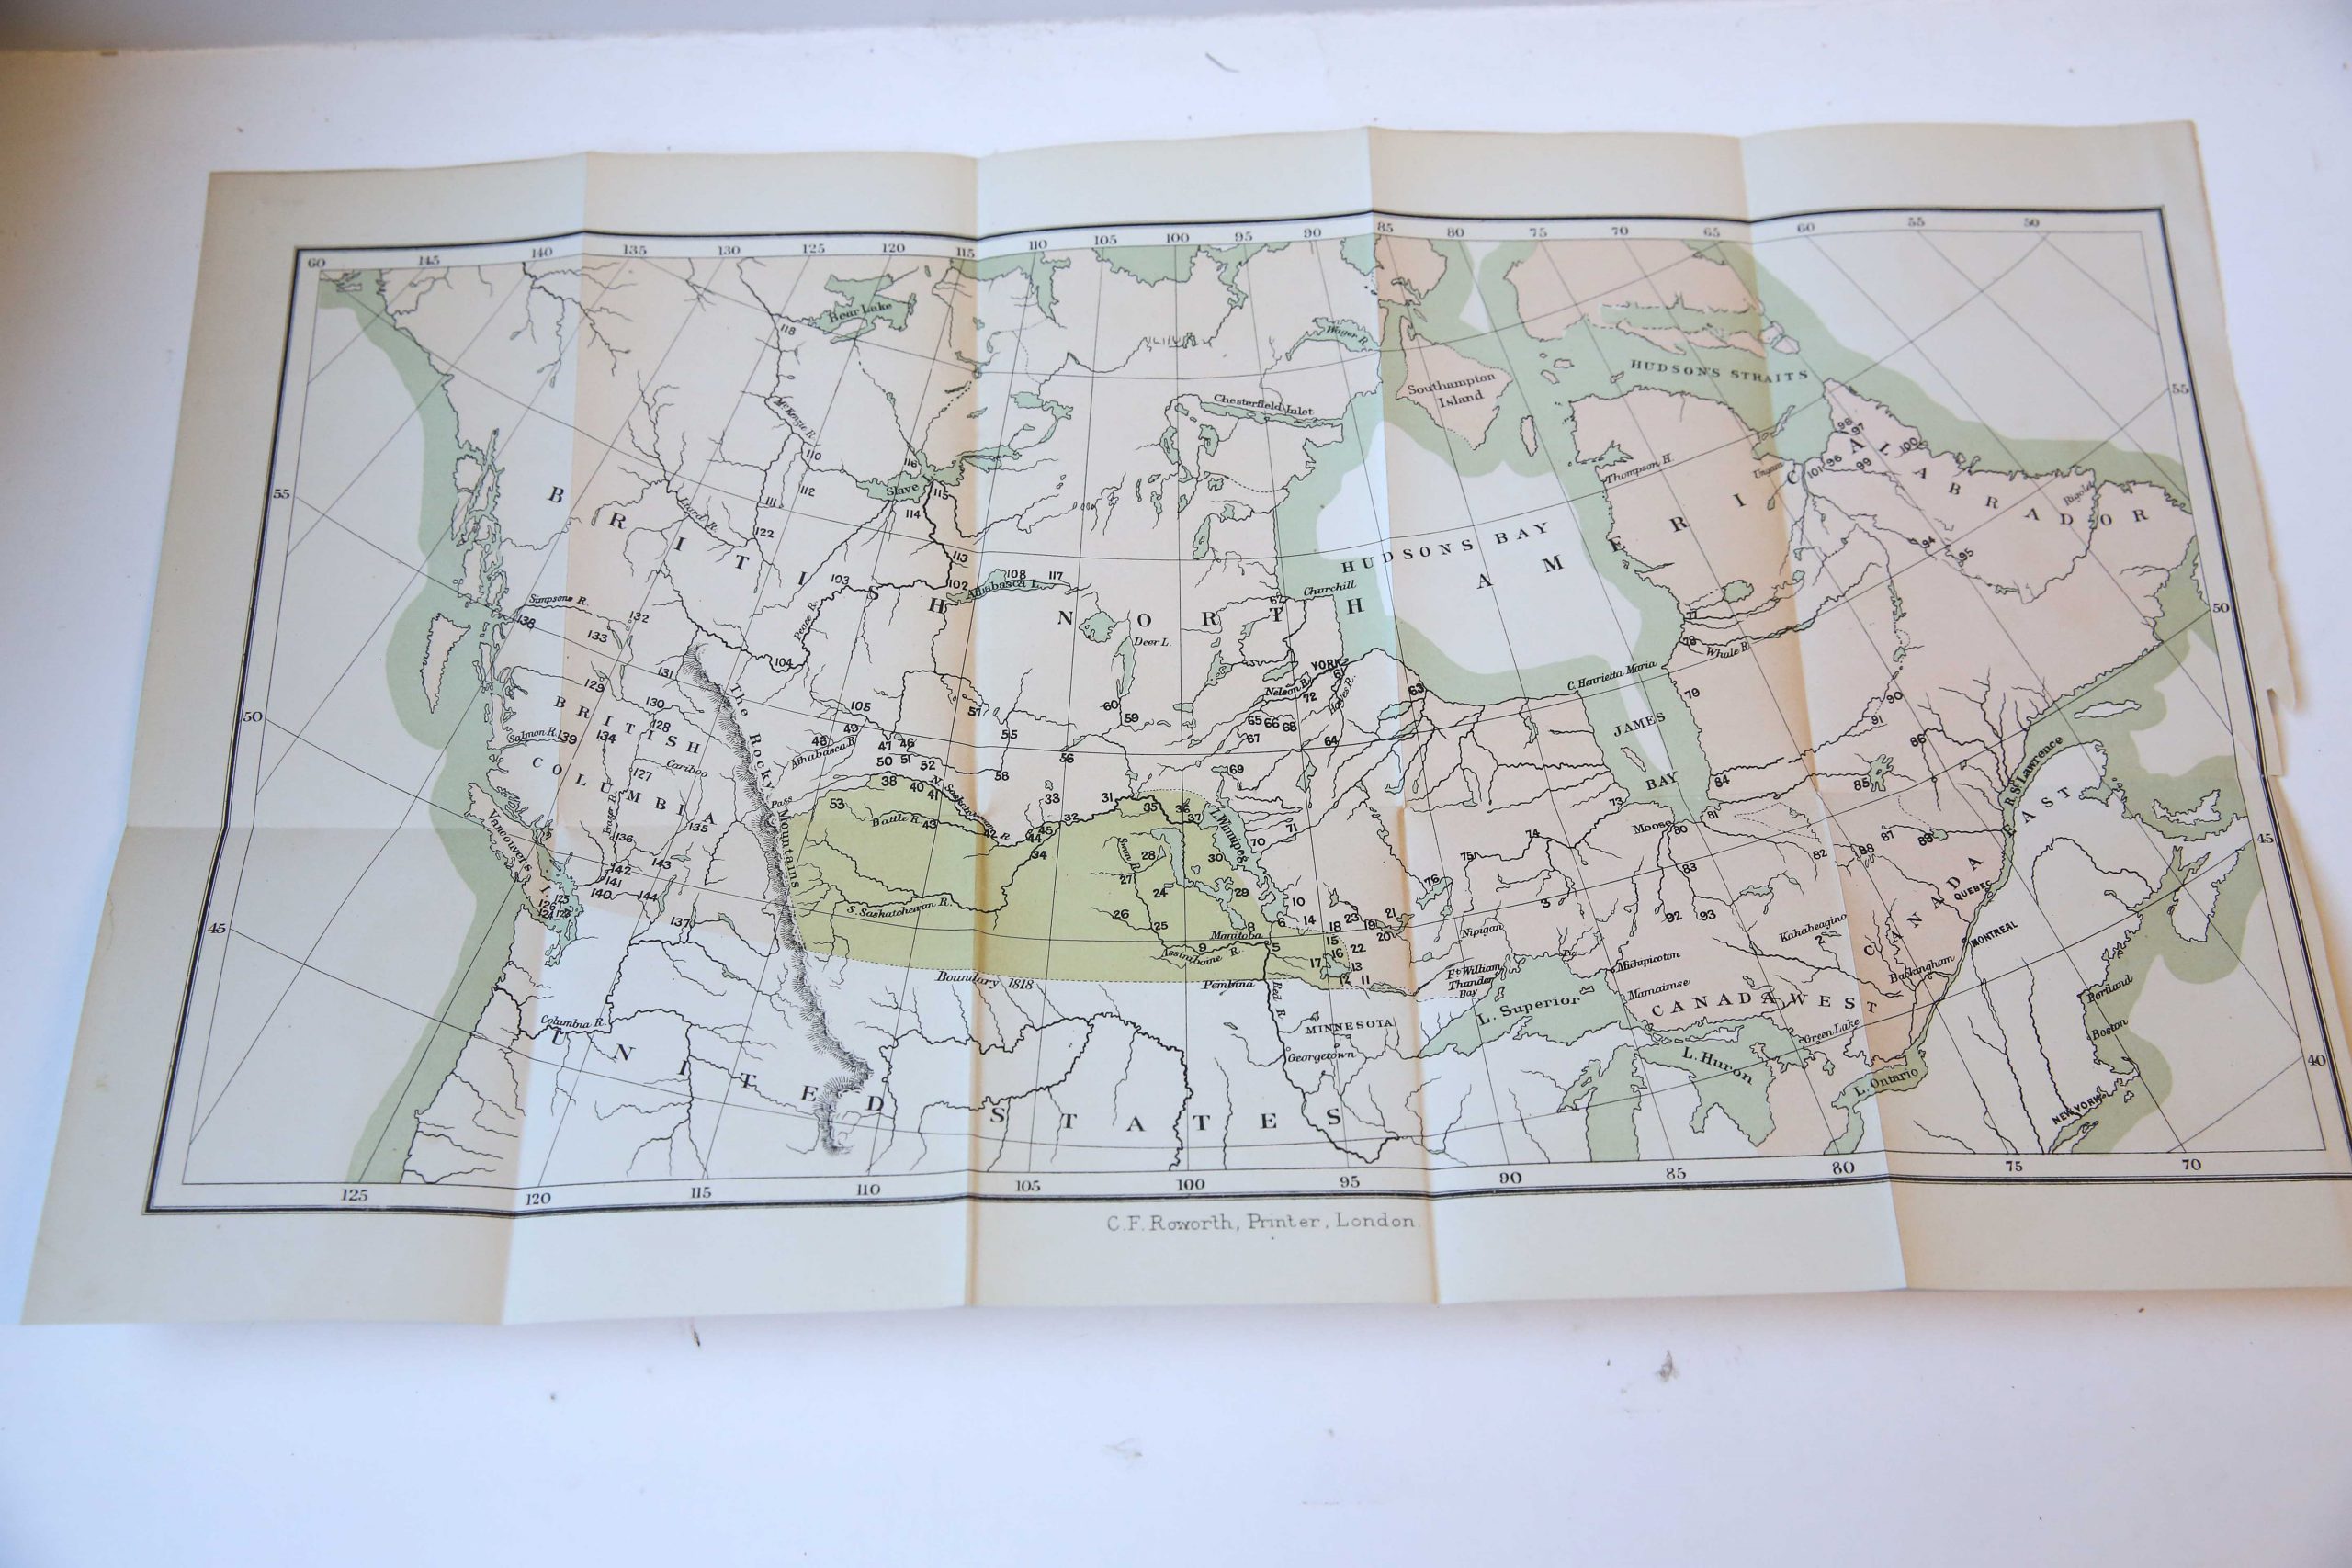 Cartography/map: Colored map of British North America, lithography 30 x 50 cm.